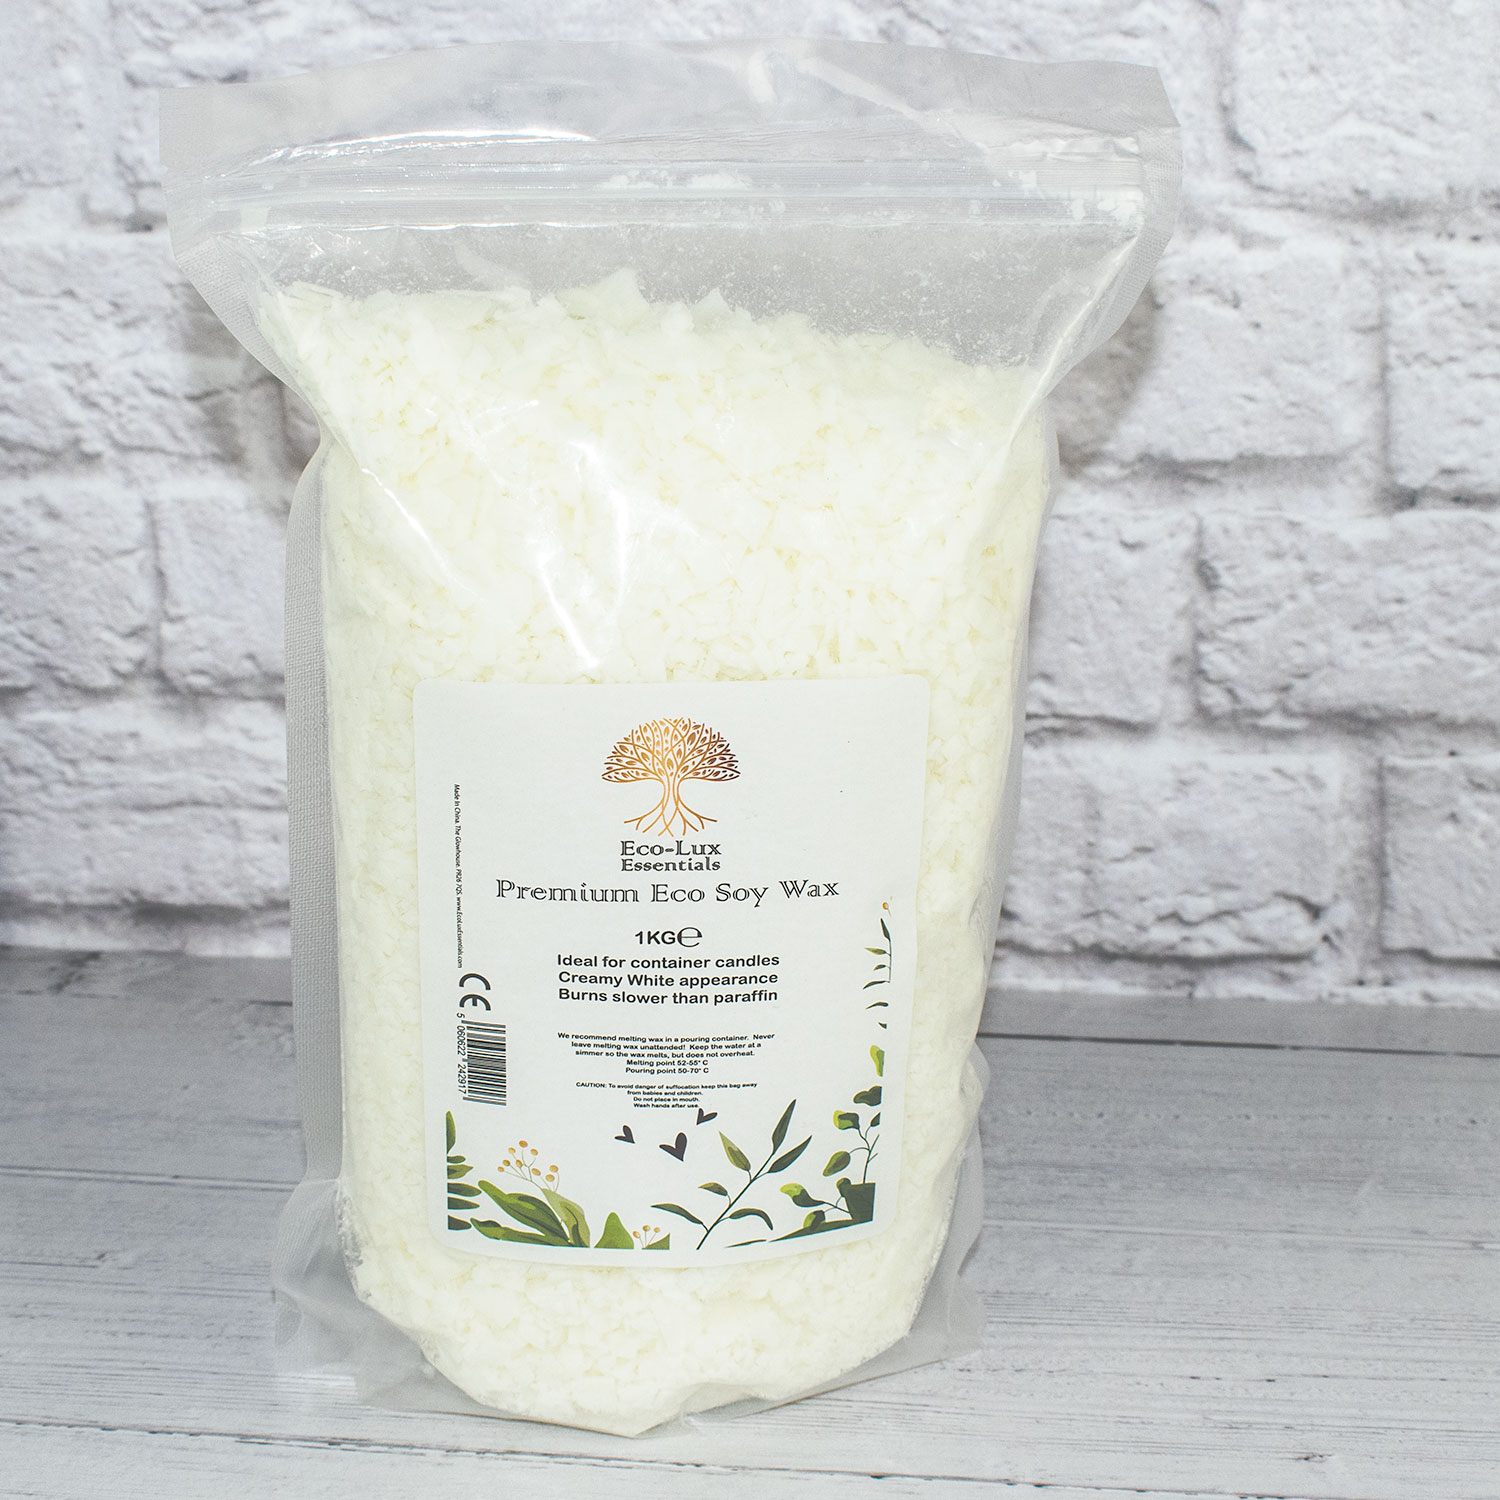 Eco Lux 1KG Soy Wax